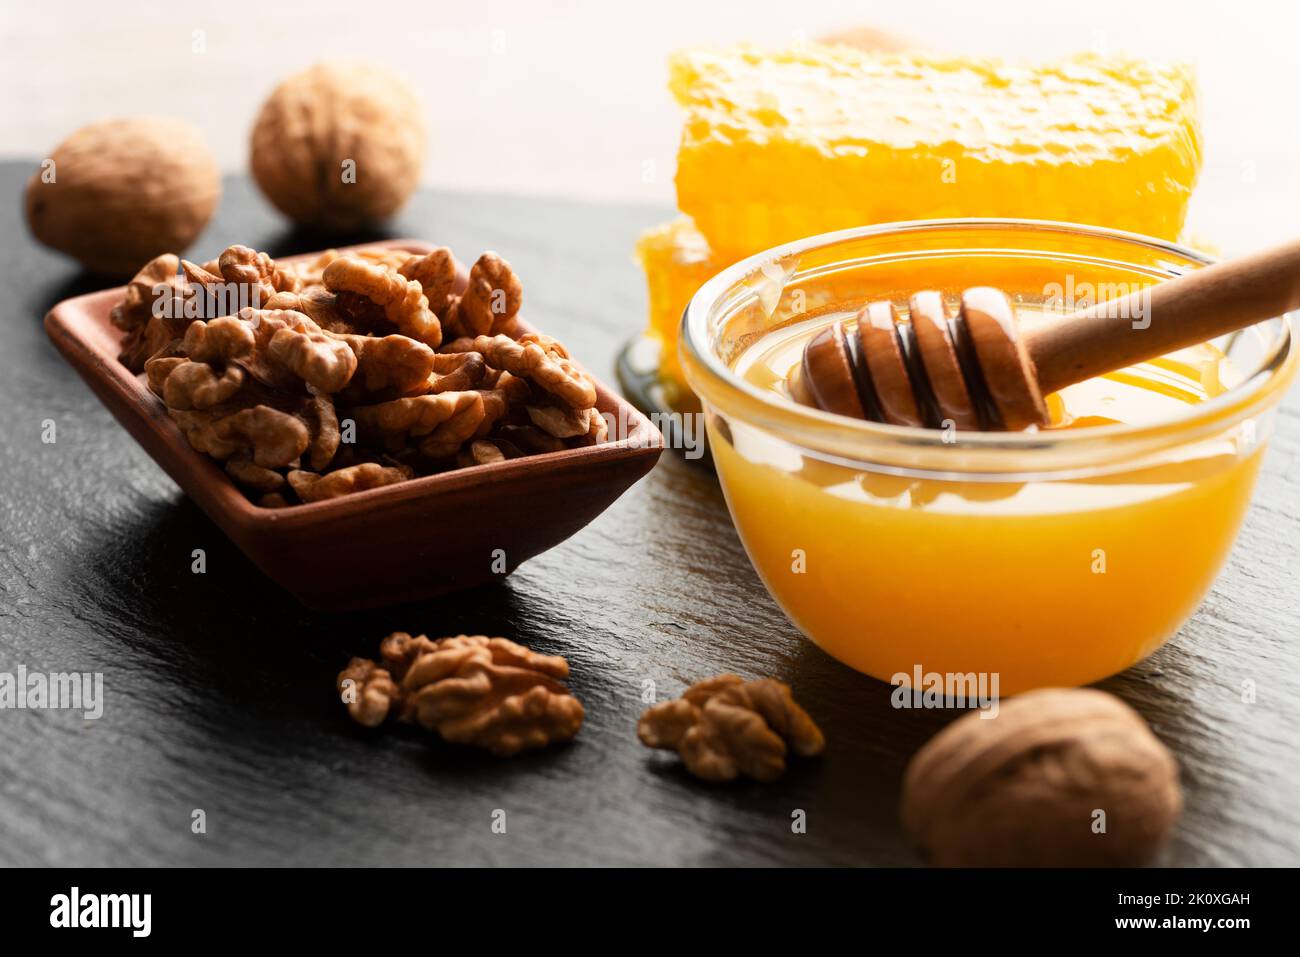 Slate tray with honey walnuts and honeycomb on kitchen table Stock Photo